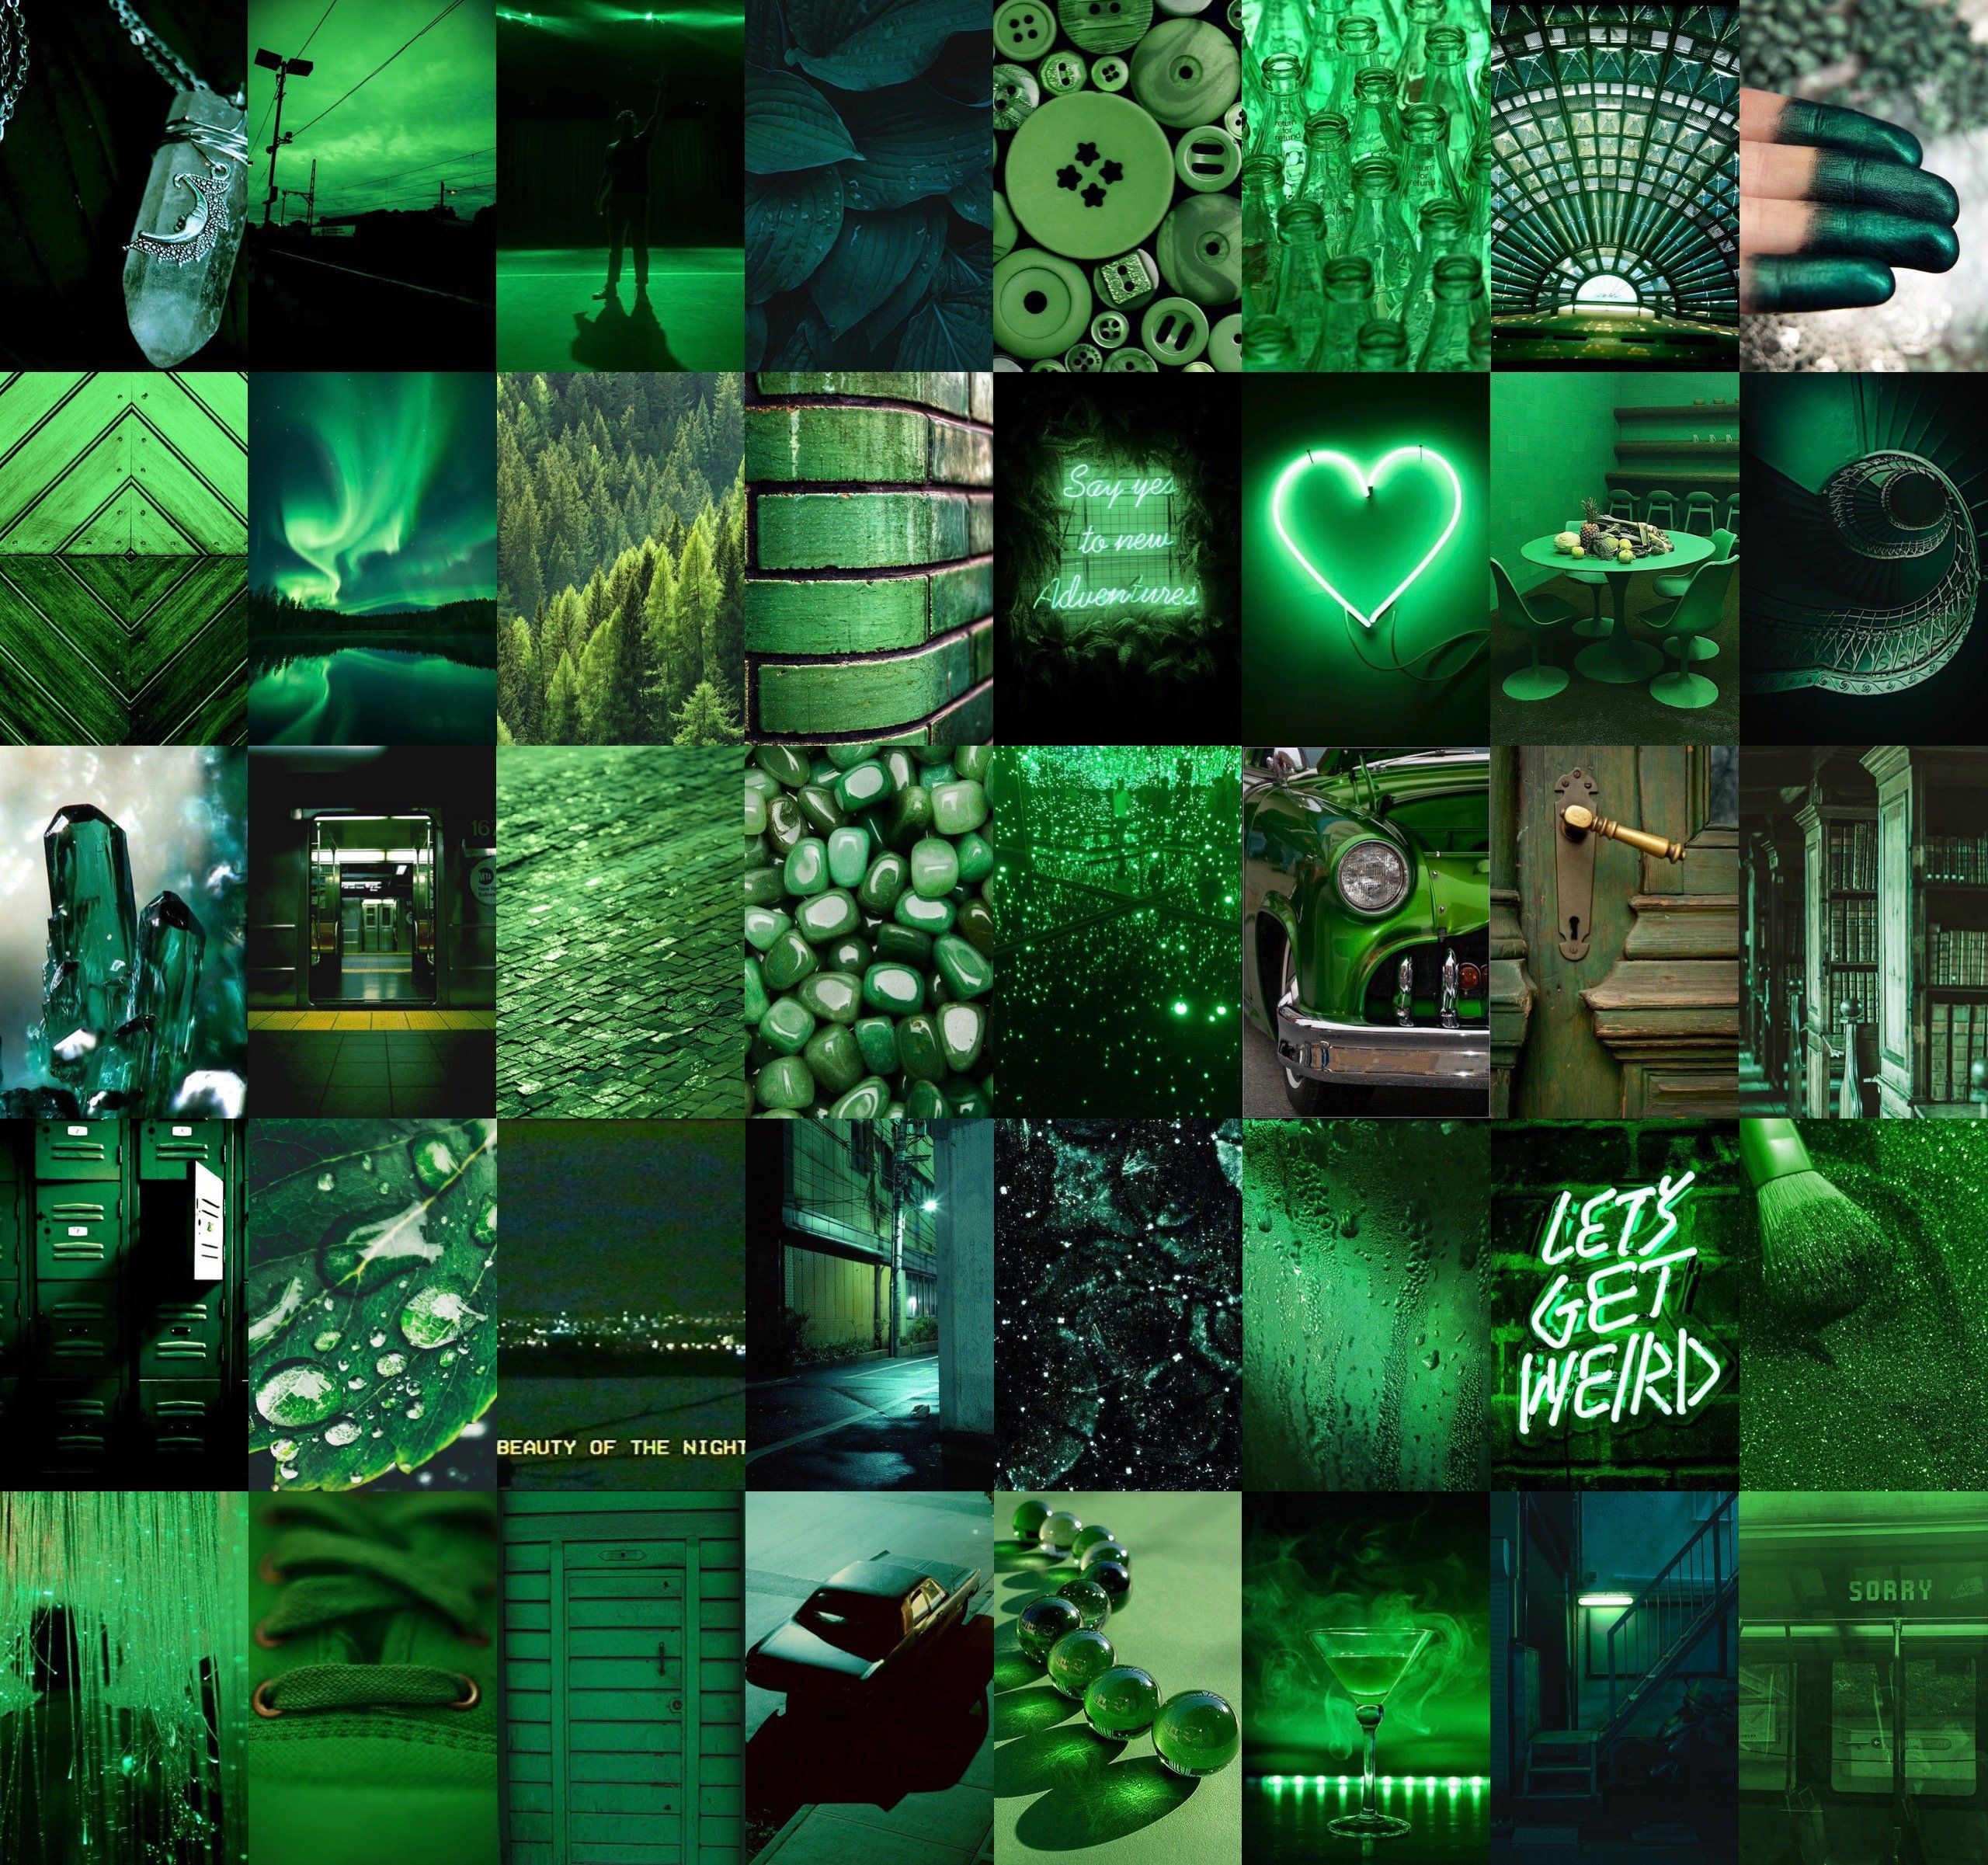 Aesthetic collage of green photos - Neon green, lime green